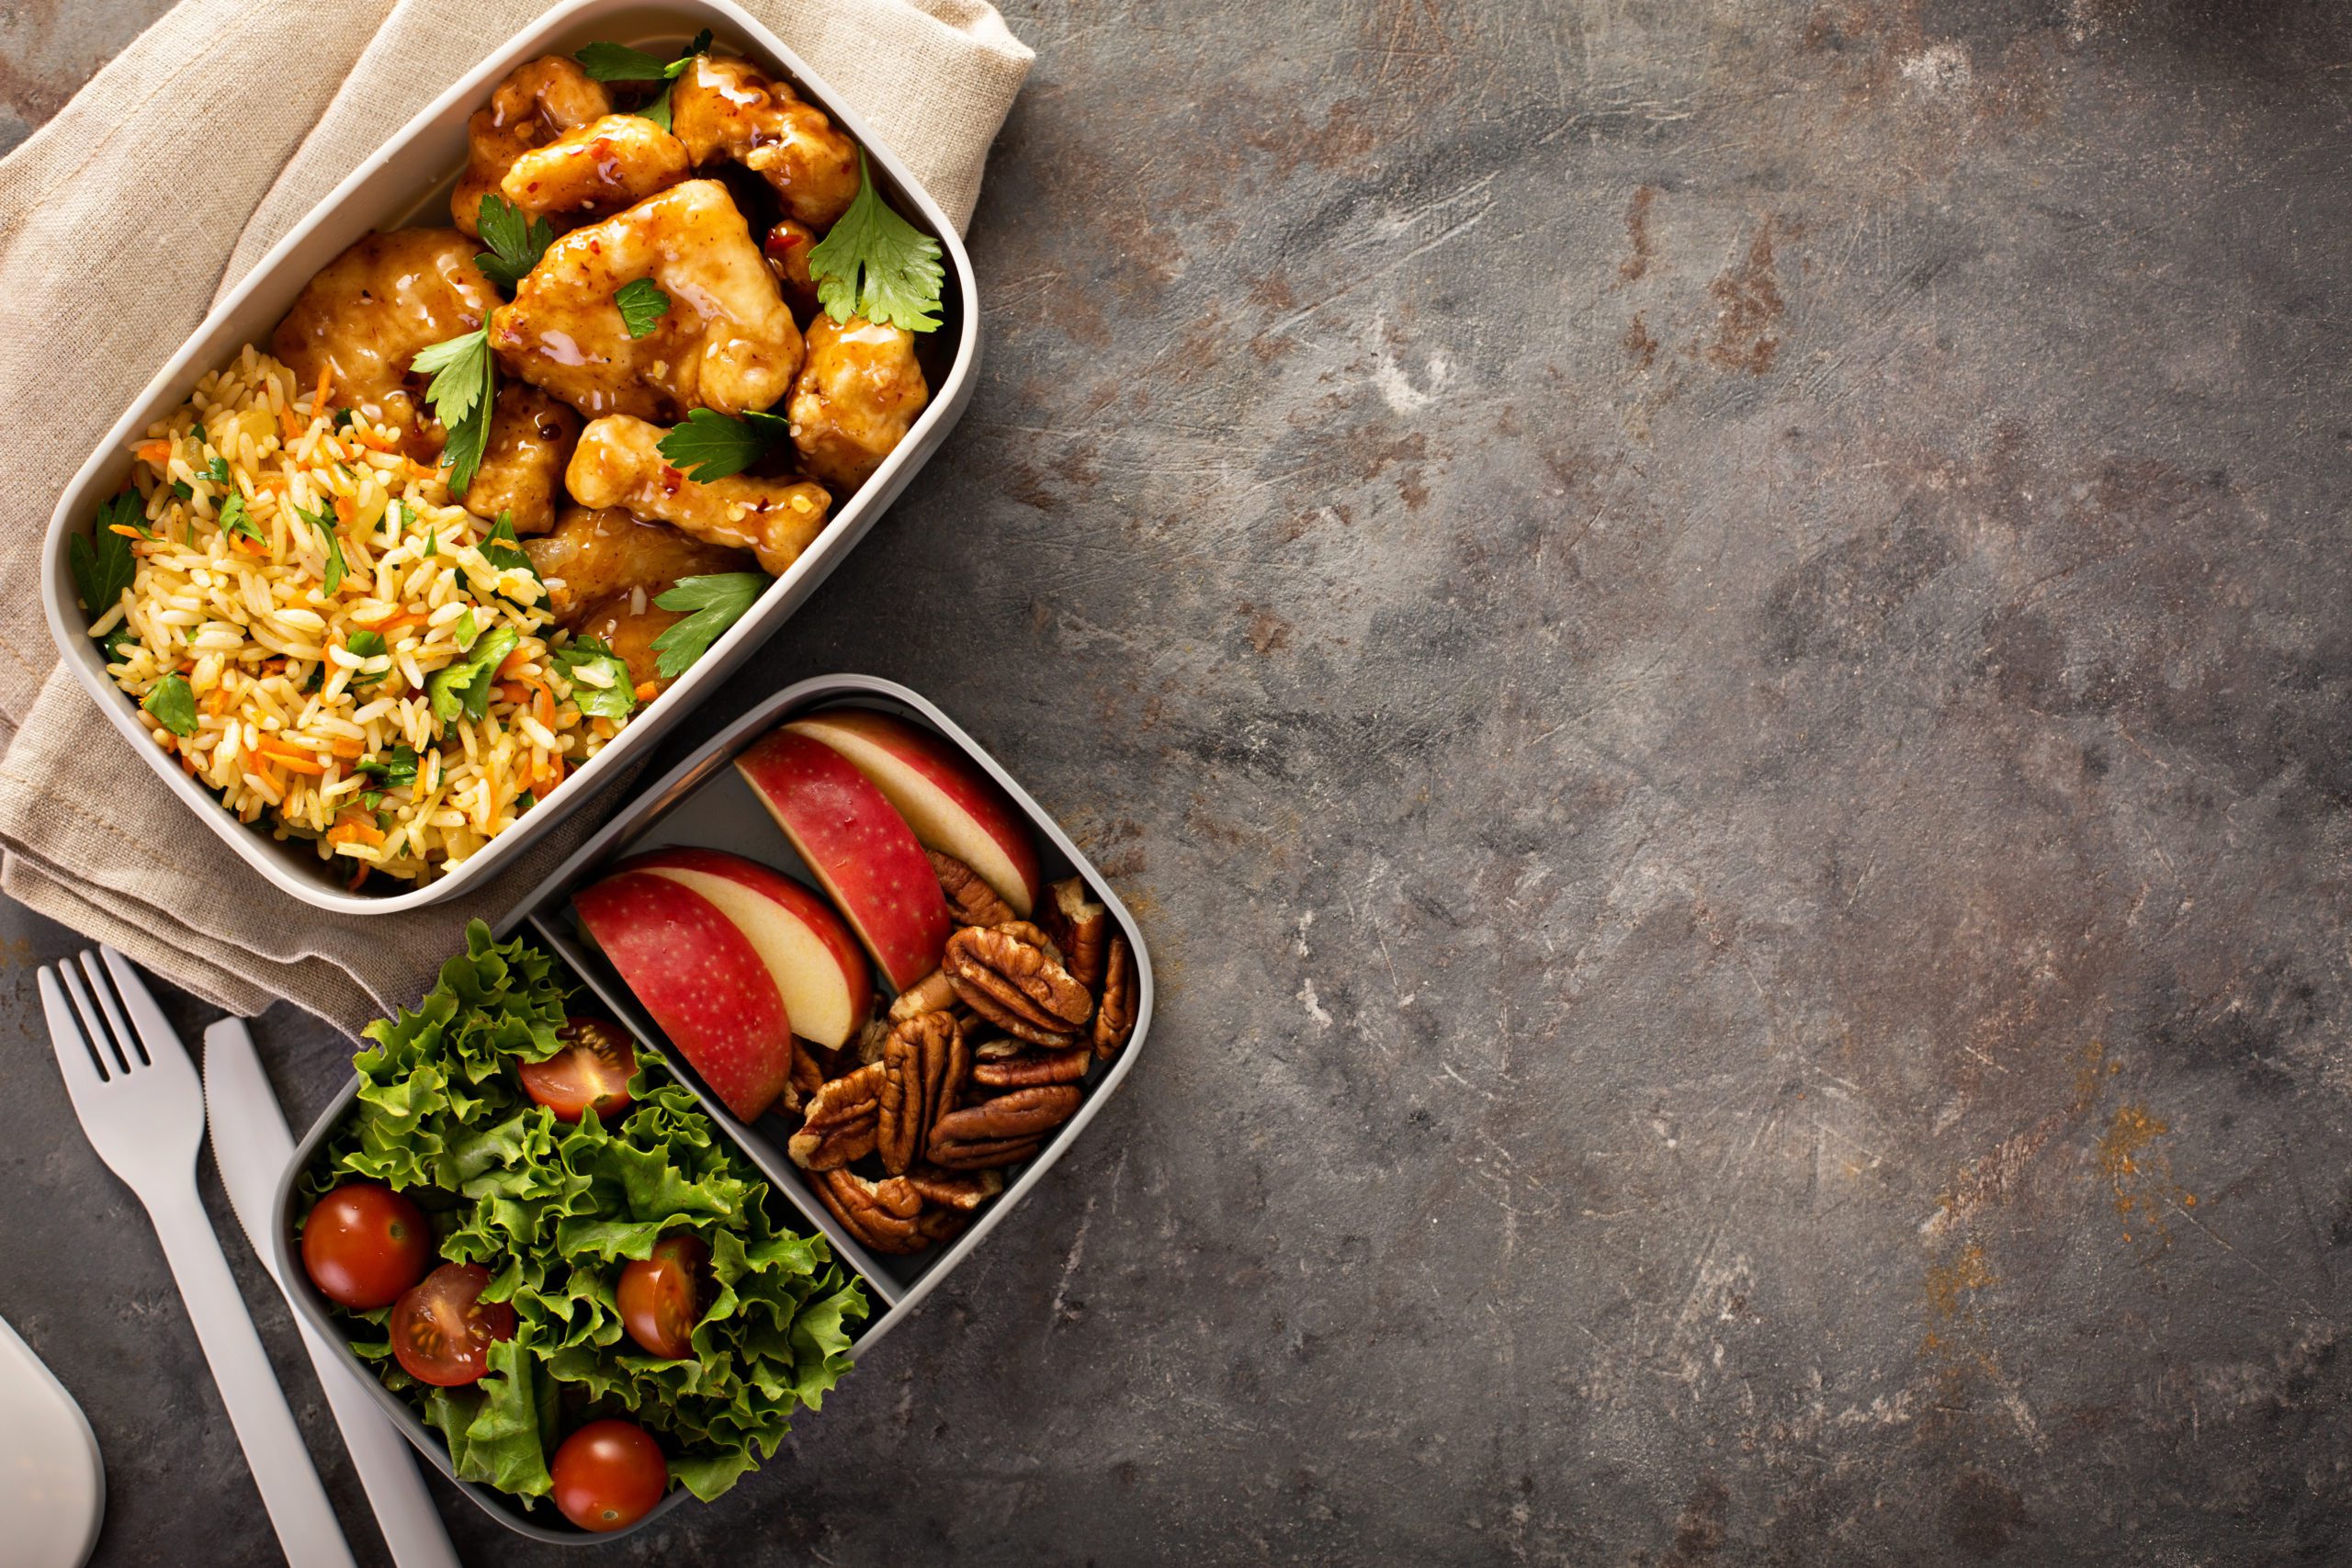 examples of lunchboxes, one is orange chicken with rice and the other is apple slices, walnuts and a salad